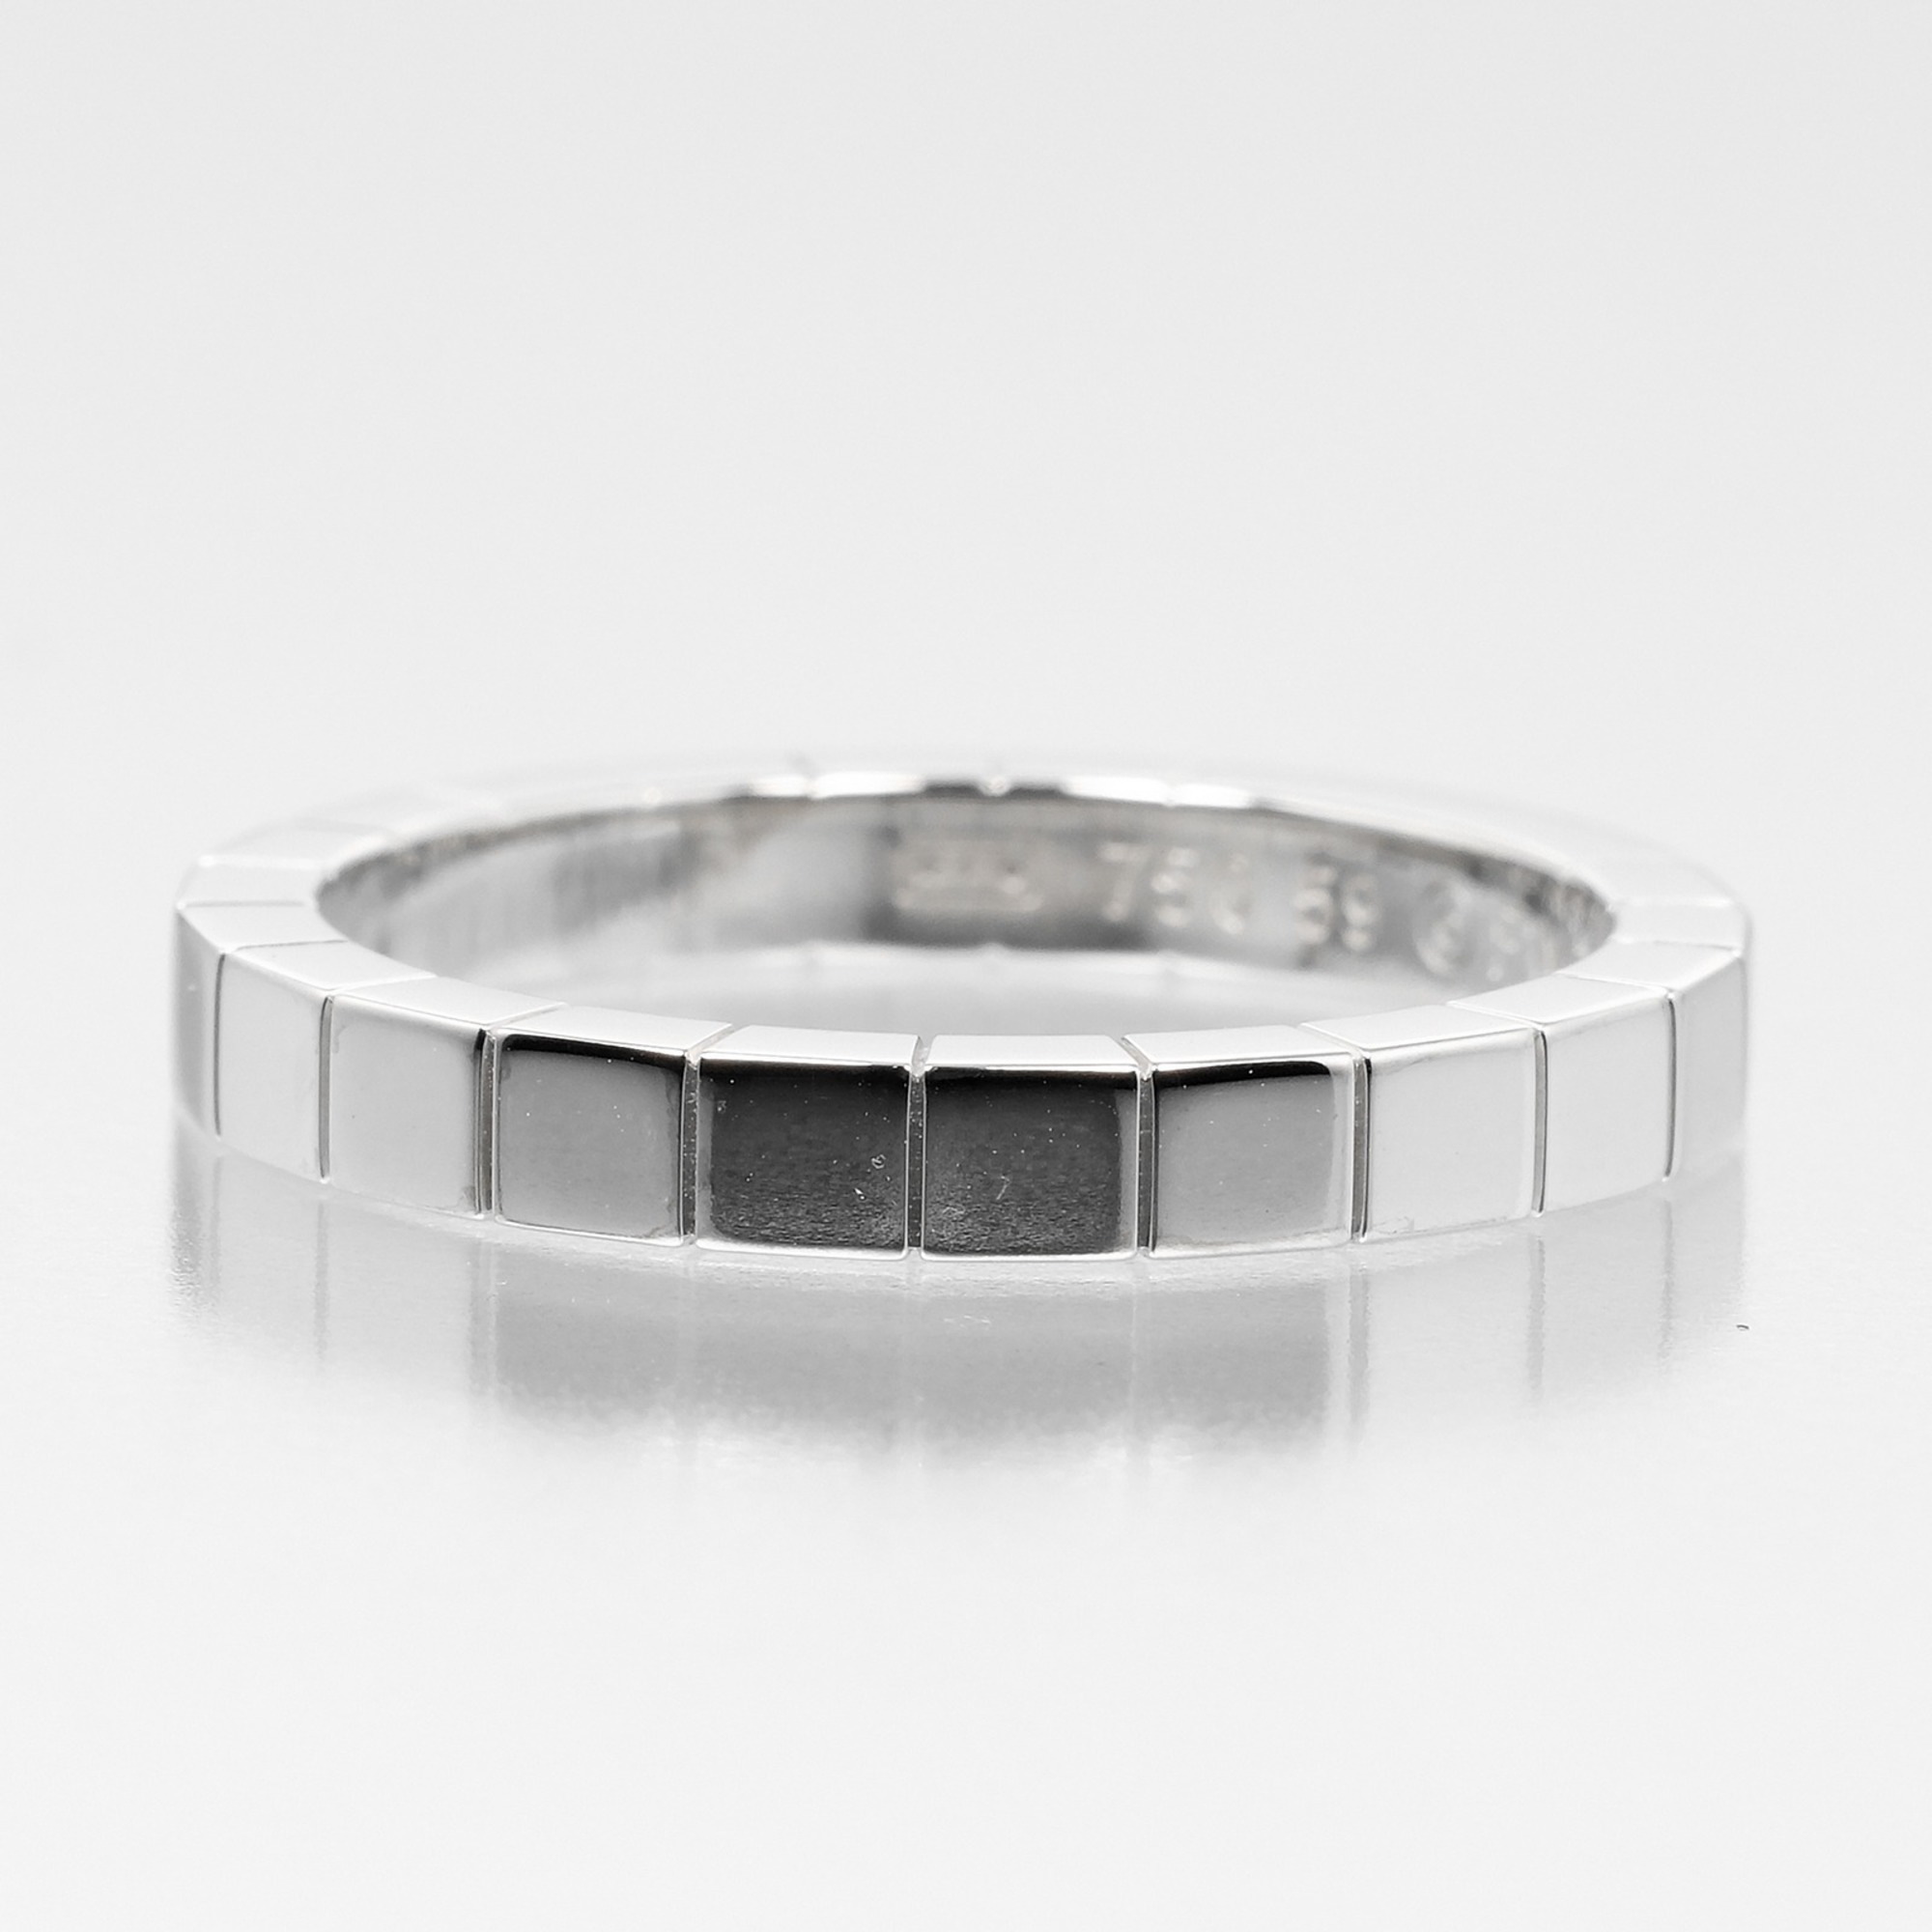 Cartier CARTIER Raniere No. 18 Ring K18 WG White Gold Approx. 6.73g I122924044